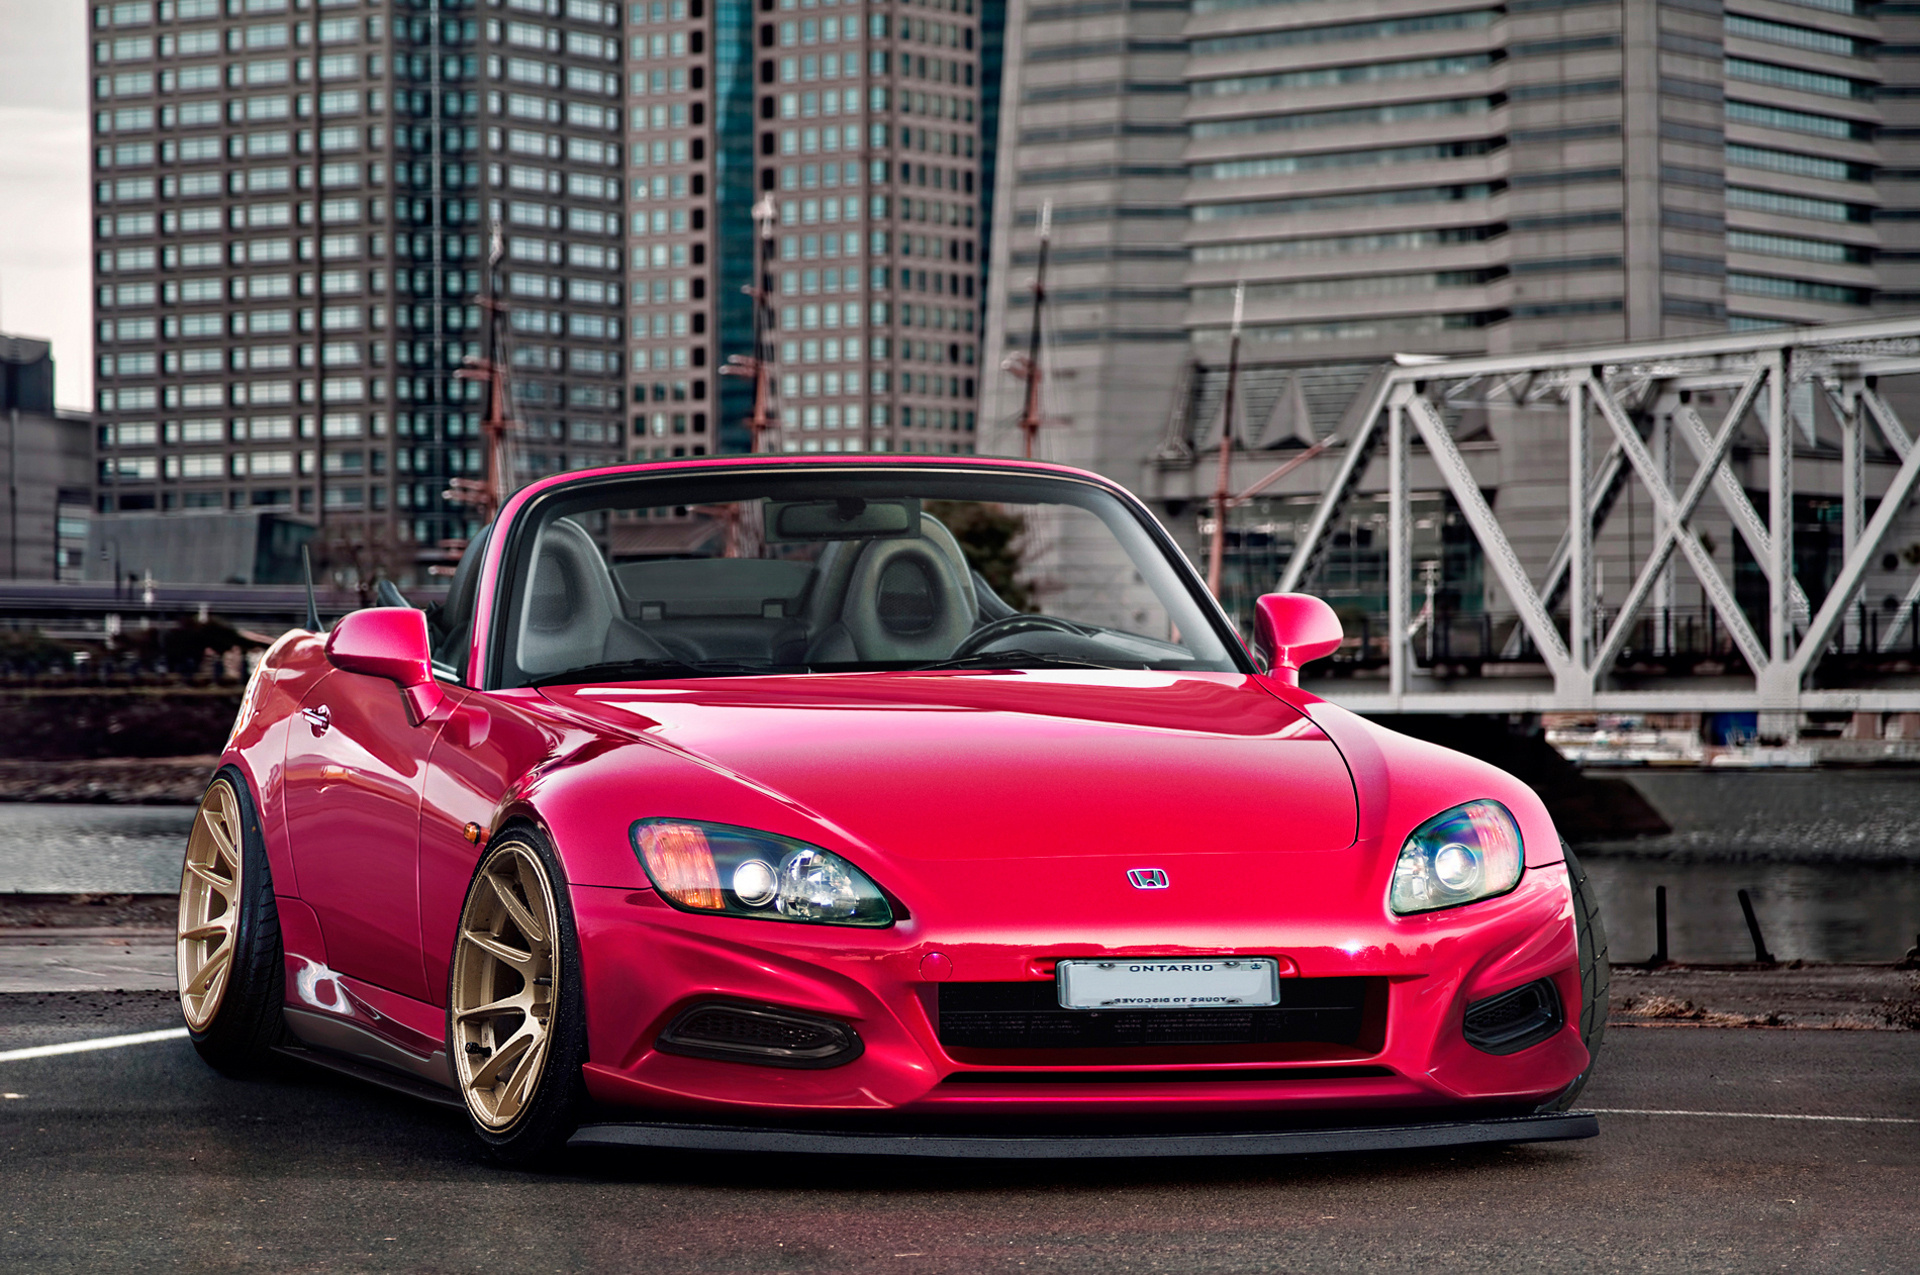 honda, cars, red, city, front view, roadster, s2000